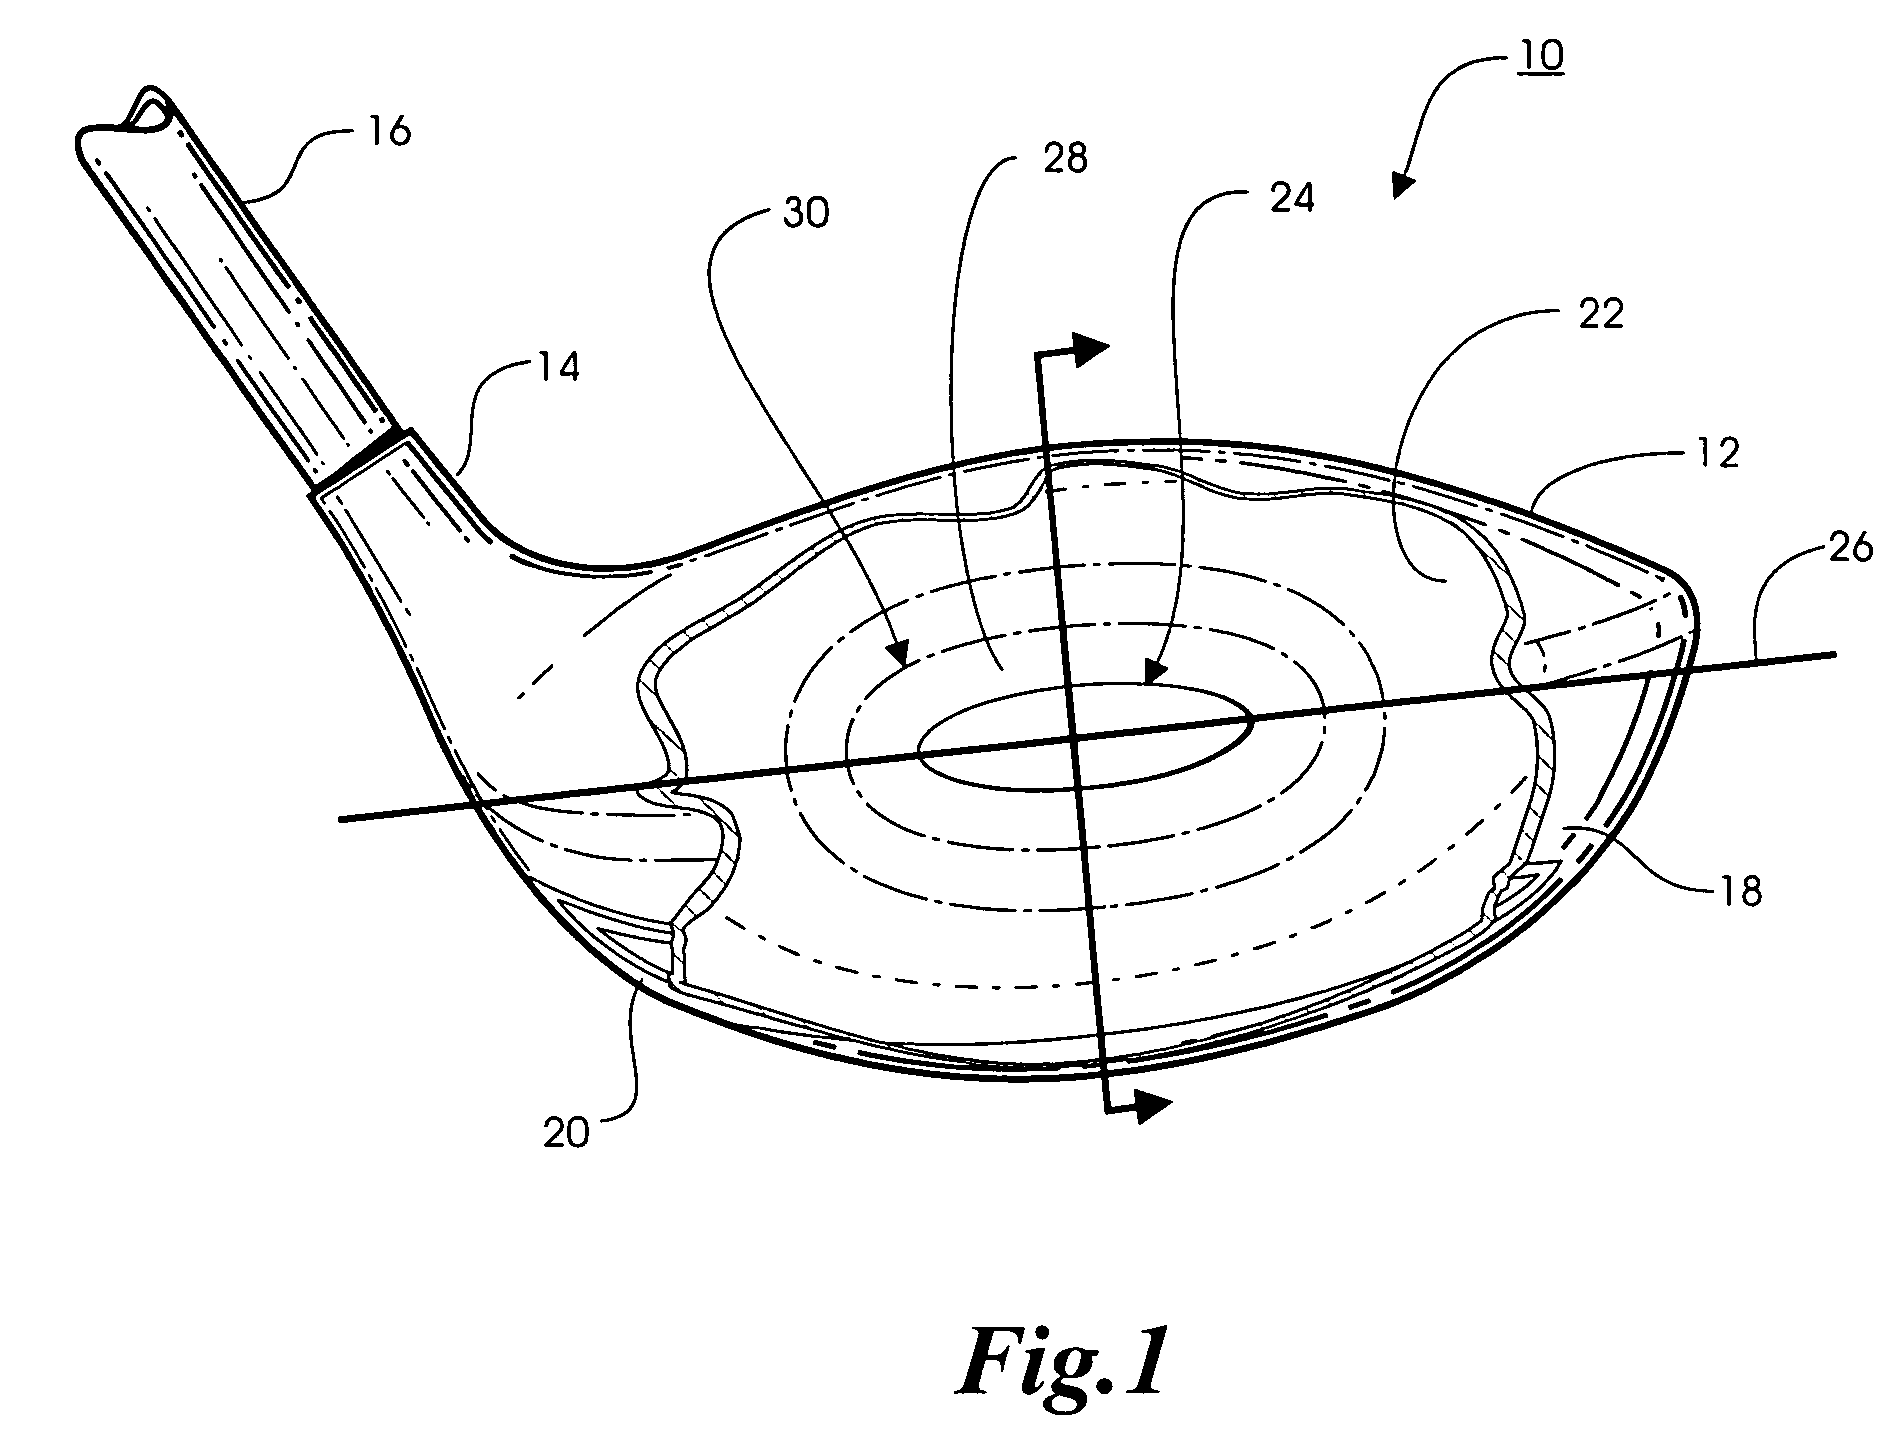 Method of manufacturing a face plate for a golf club head